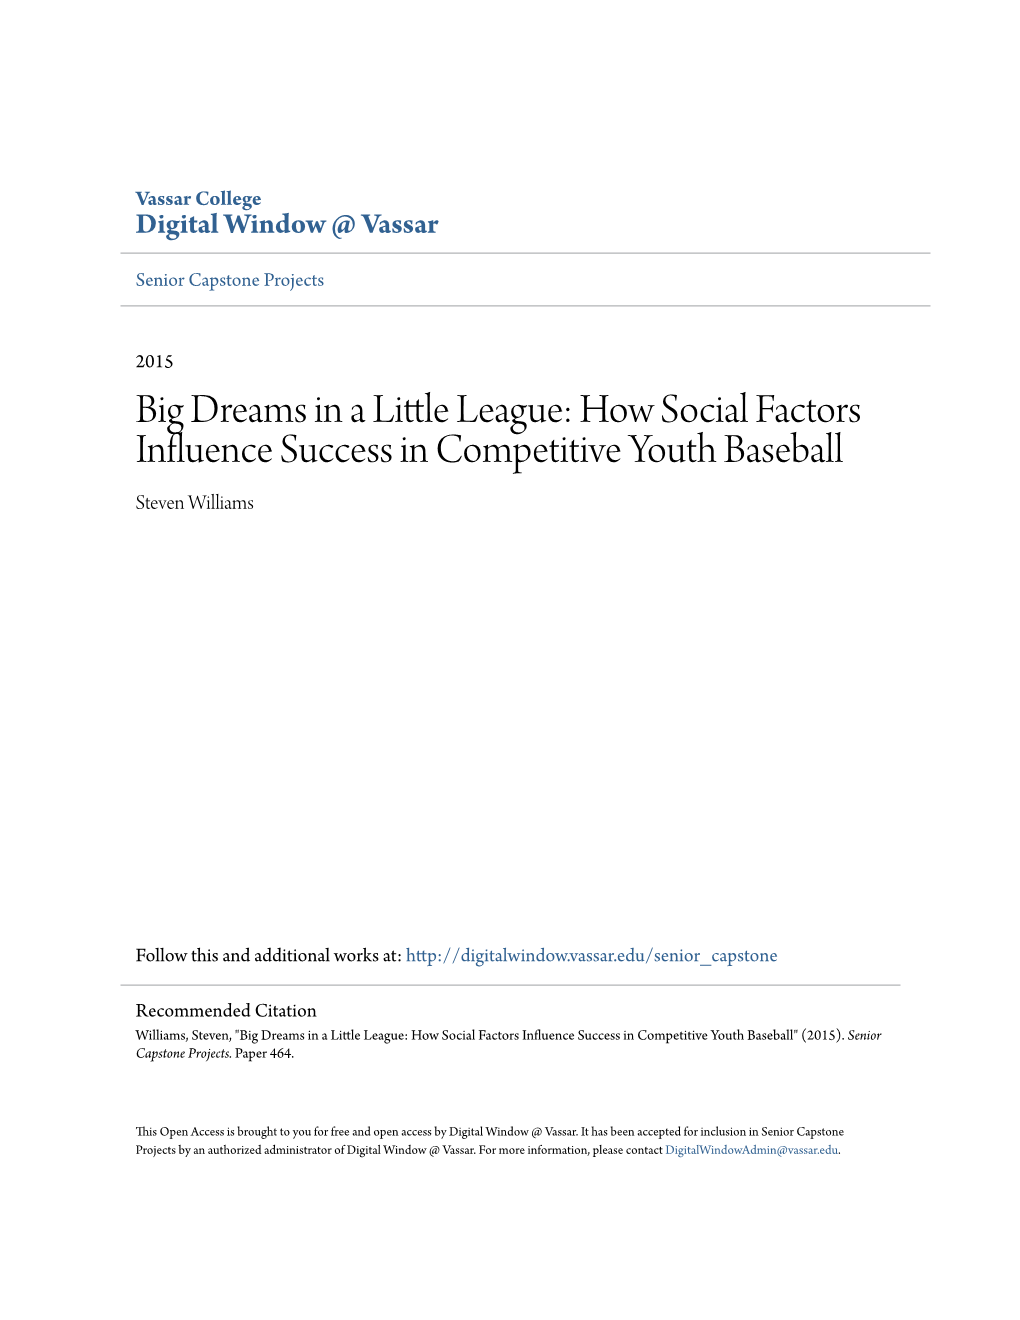 Big Dreams in a Little League: How Social Factors Influence Success in Competitive Youth Baseball Steven Williams